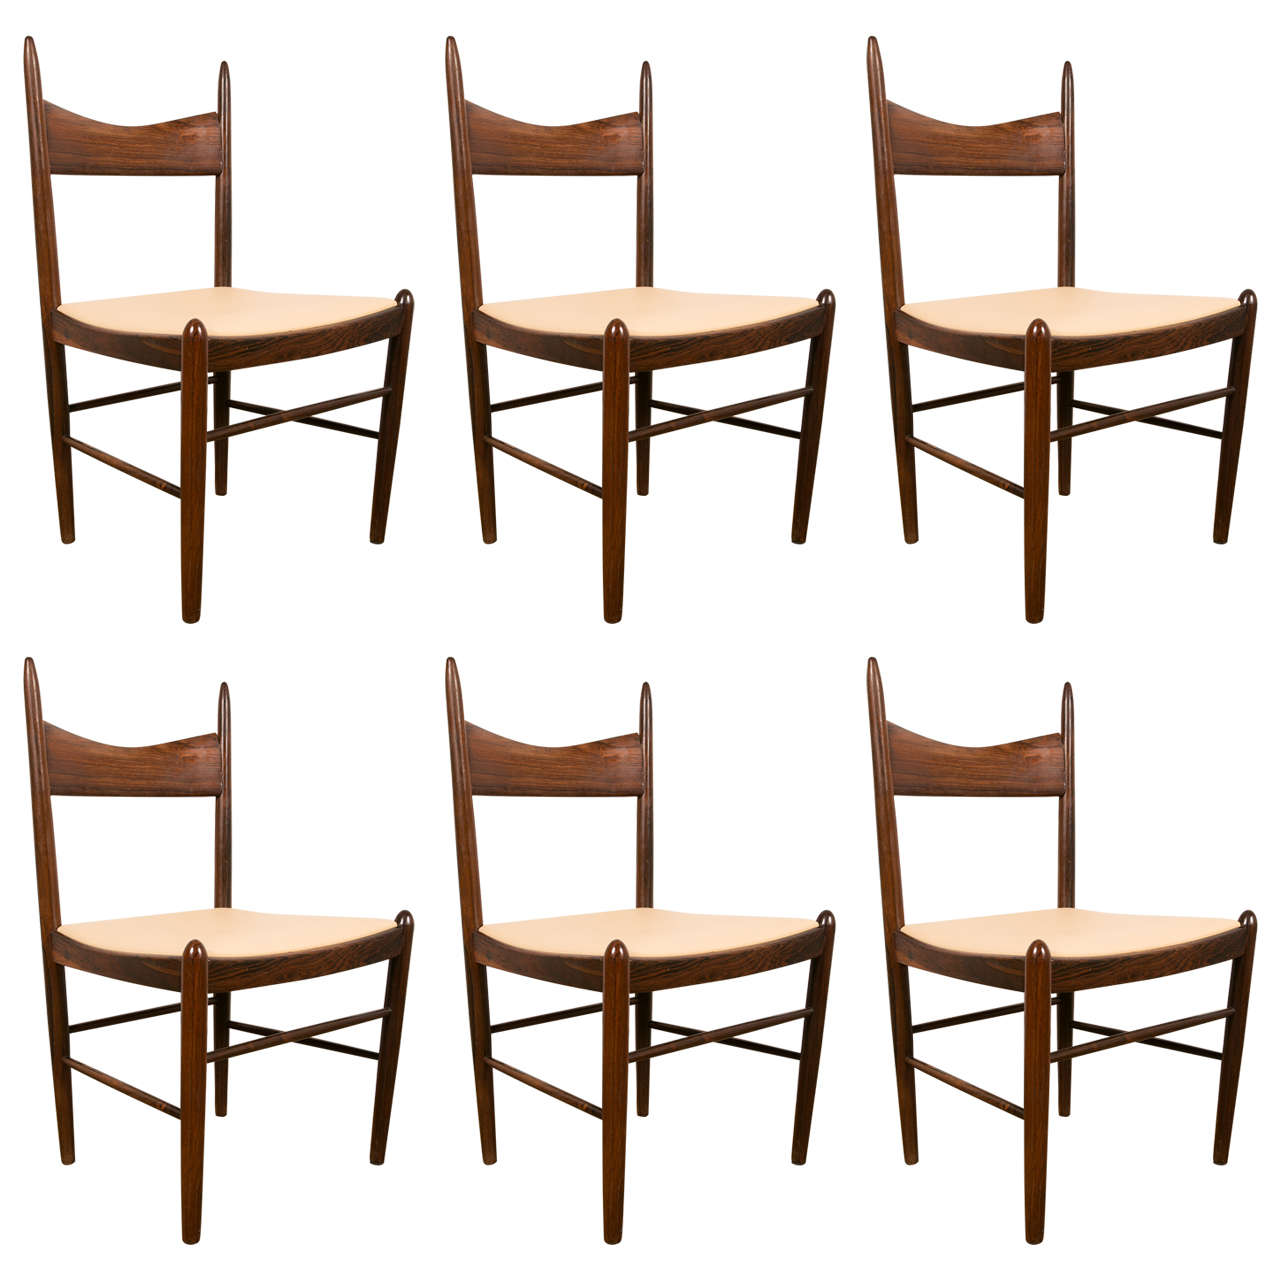 A set of 6 chairs by Illum Wikkelso, Danemark , 1960